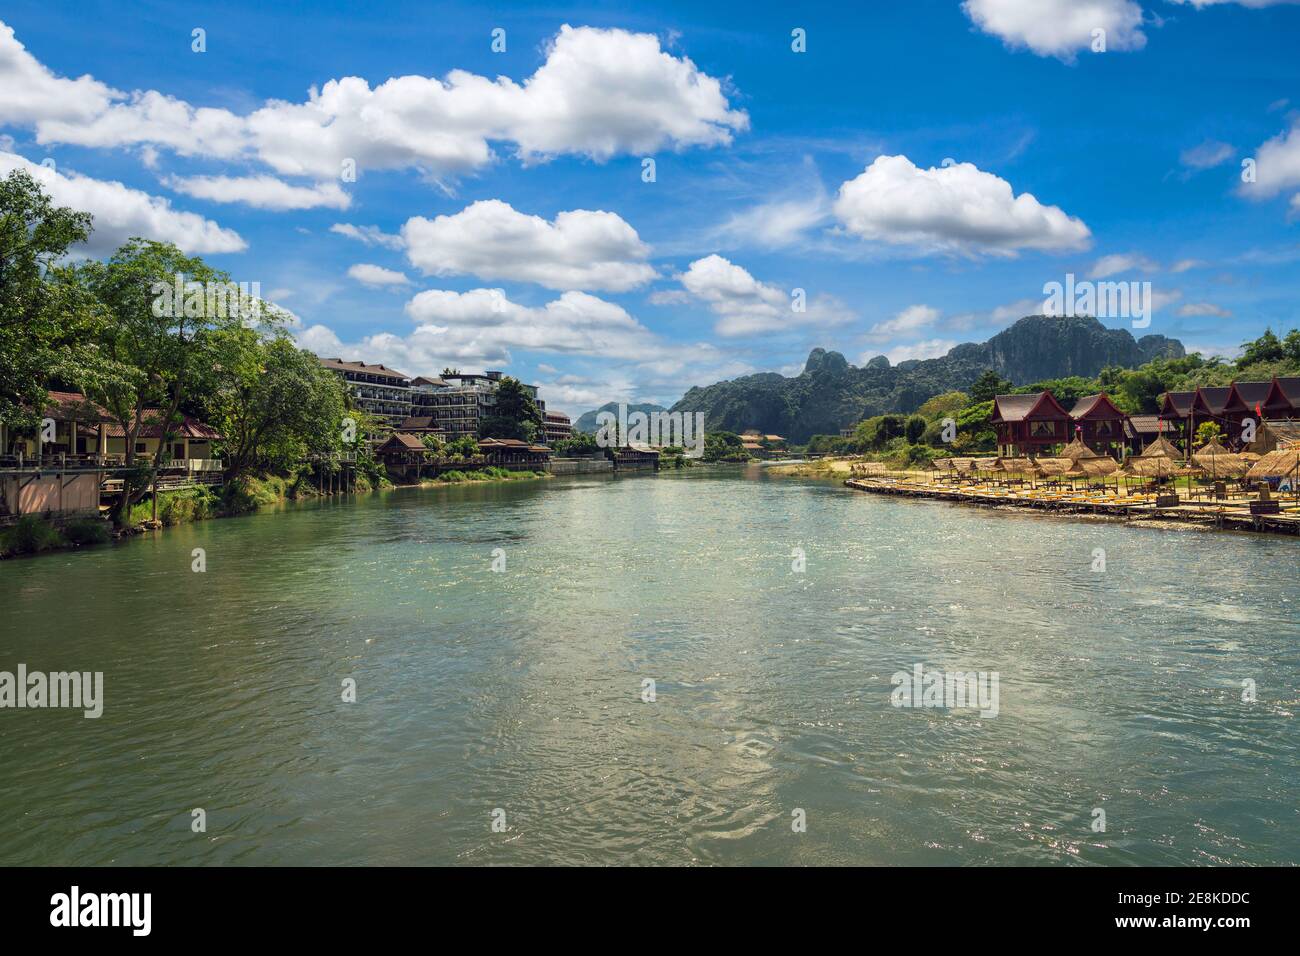 High Angle View of Landscape at Nam song in Vang vieng, Laos. Stock Photo